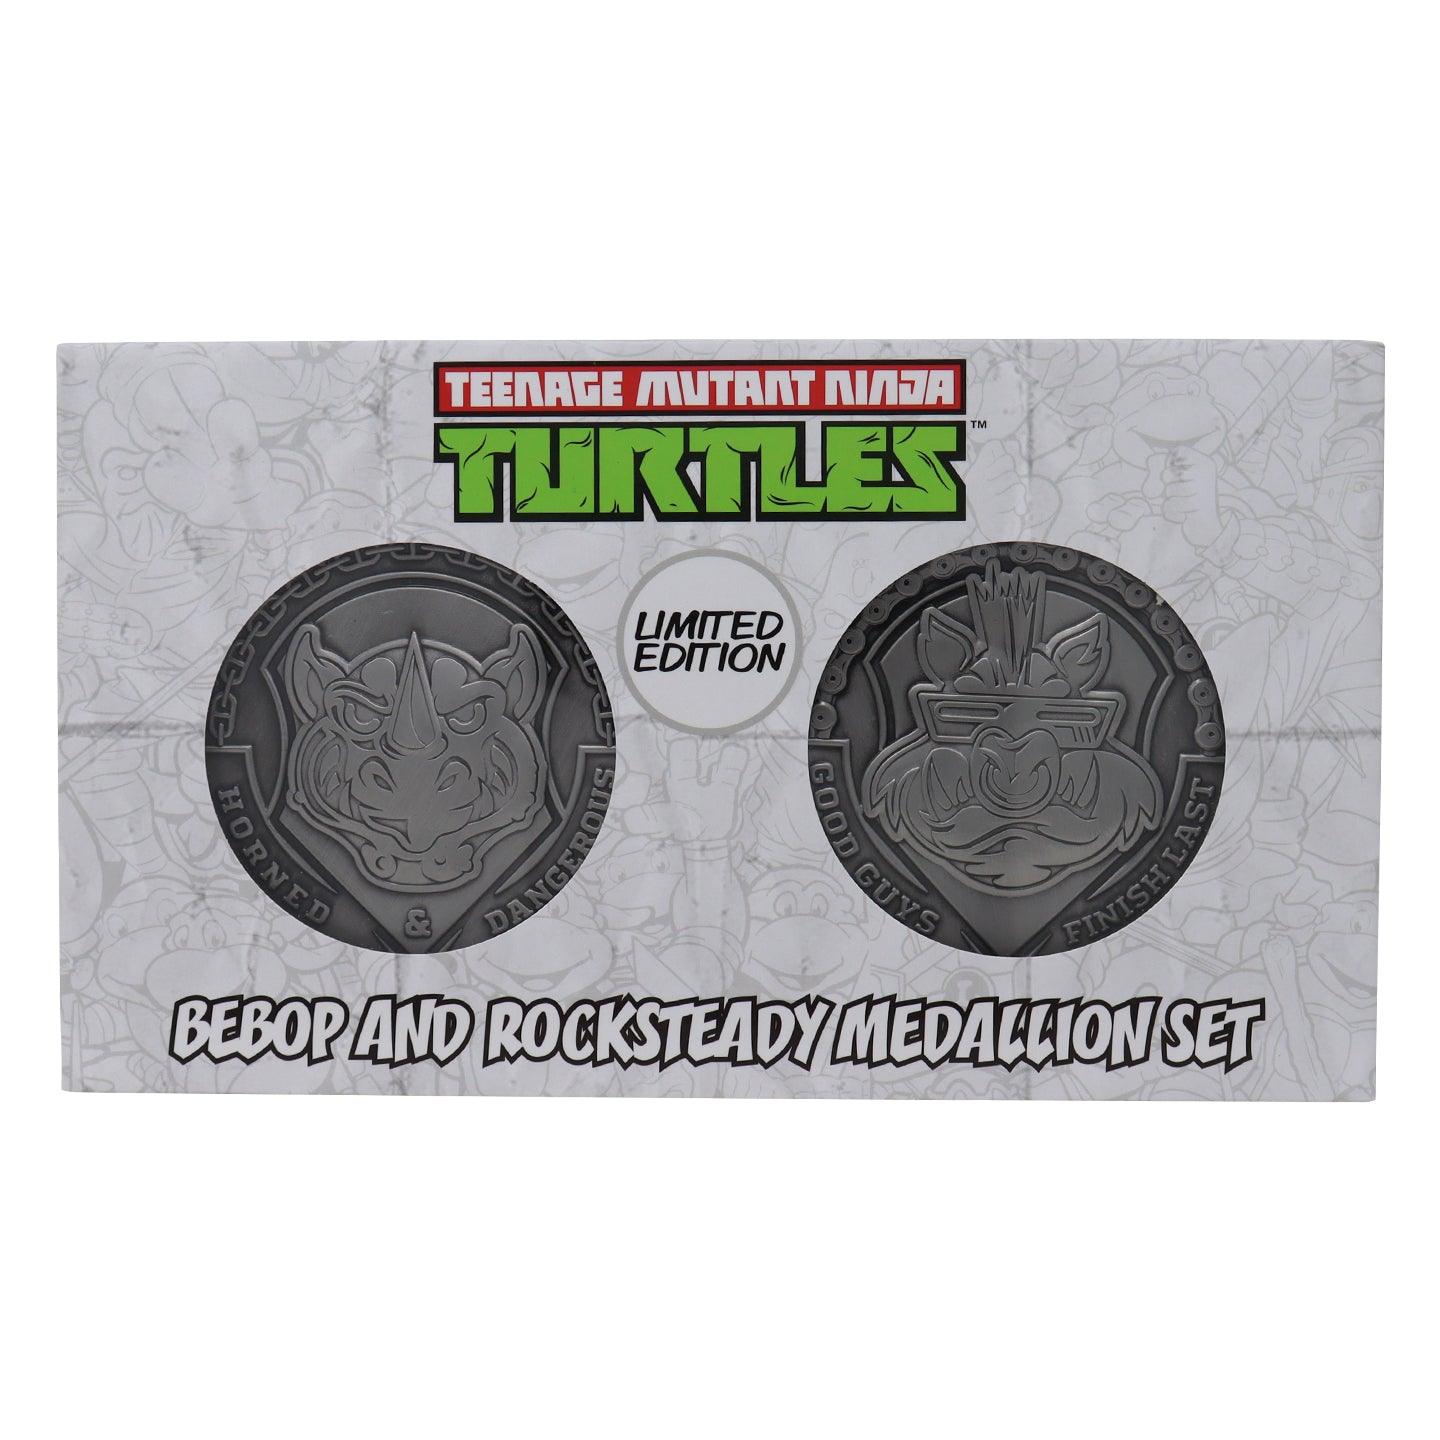 Medallion Tmnt Bad Guys - Want a New Gadget